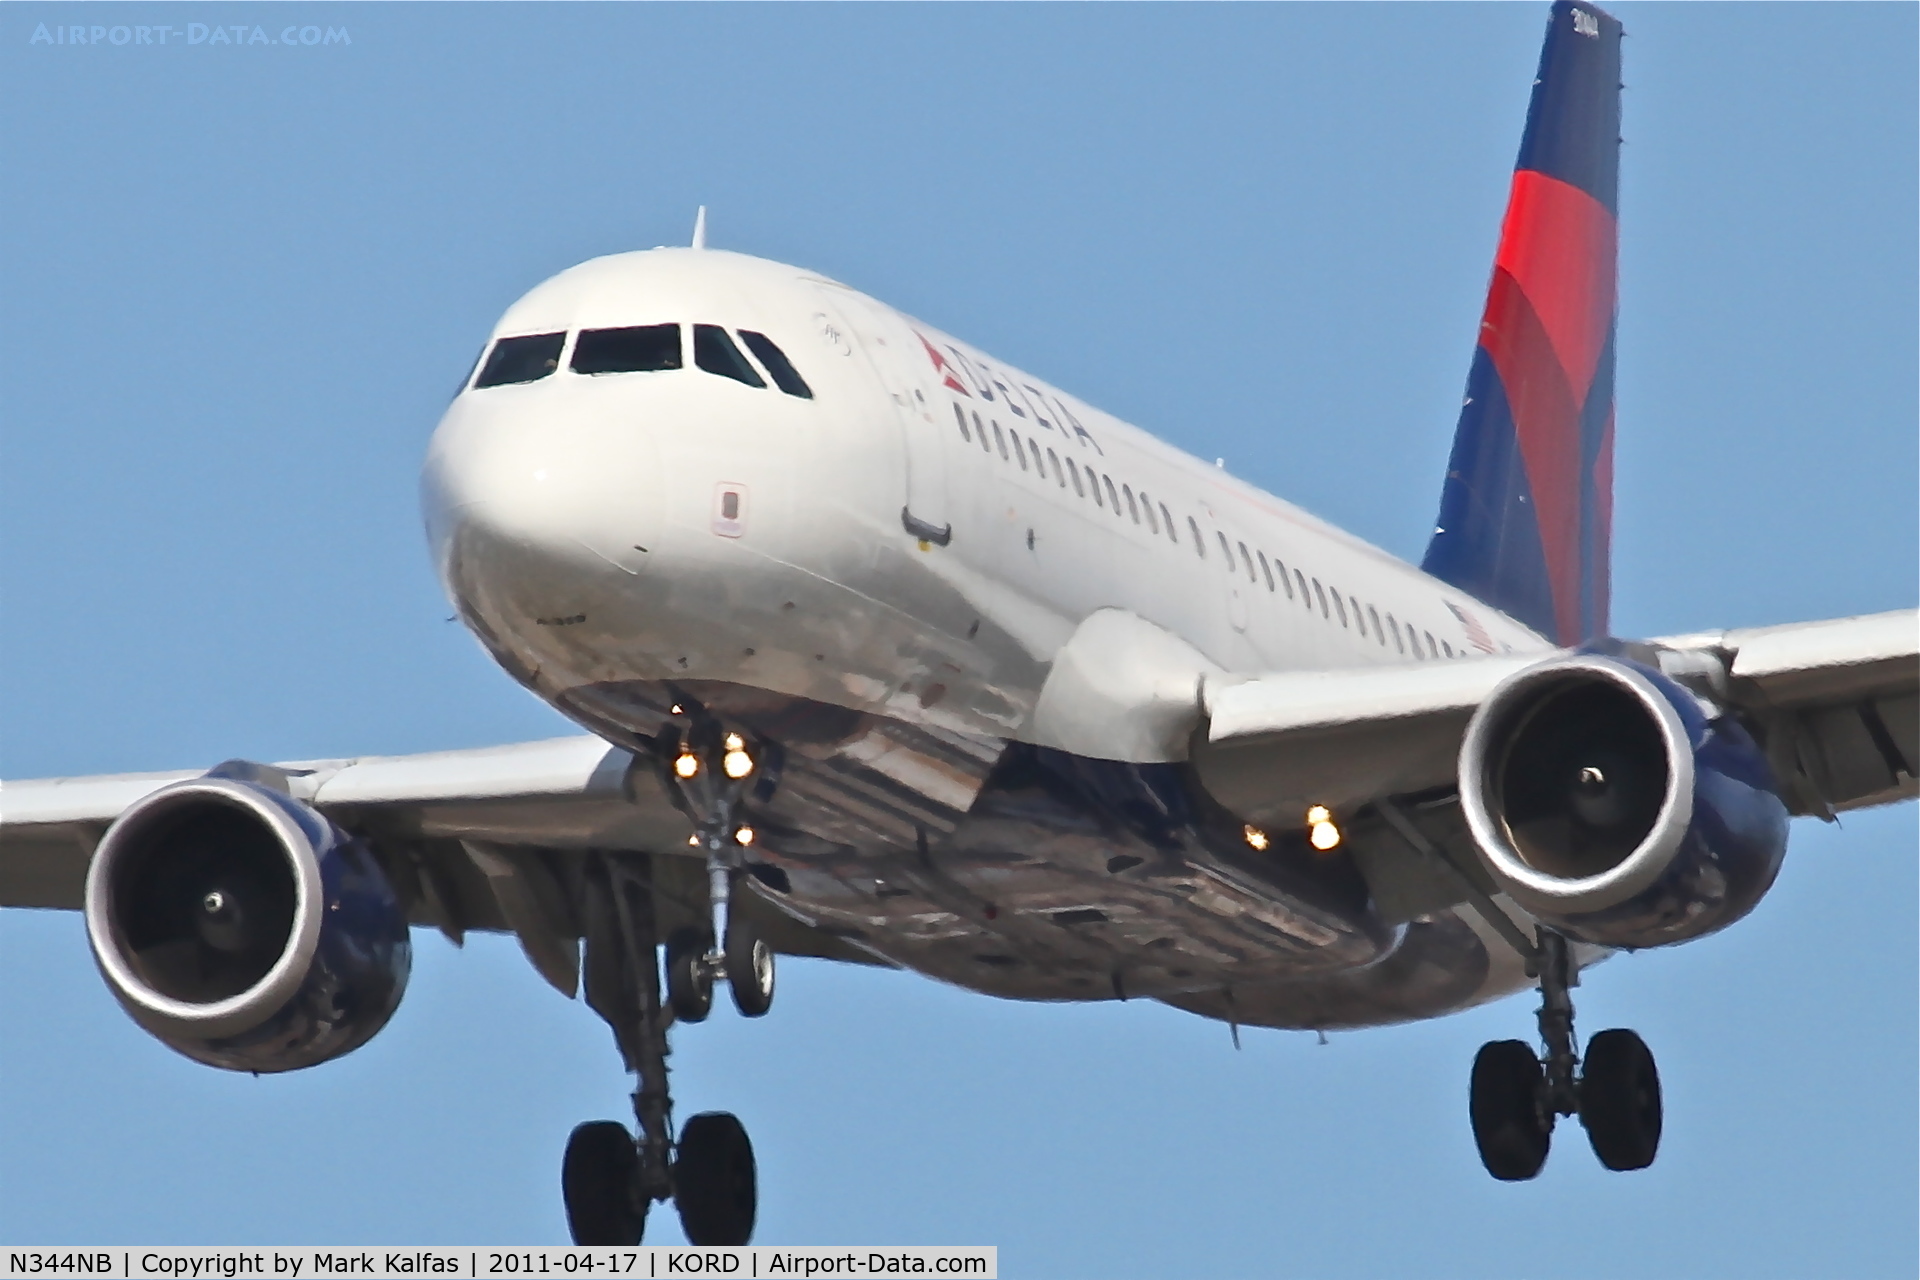 Airbus A319 Delta Airlines